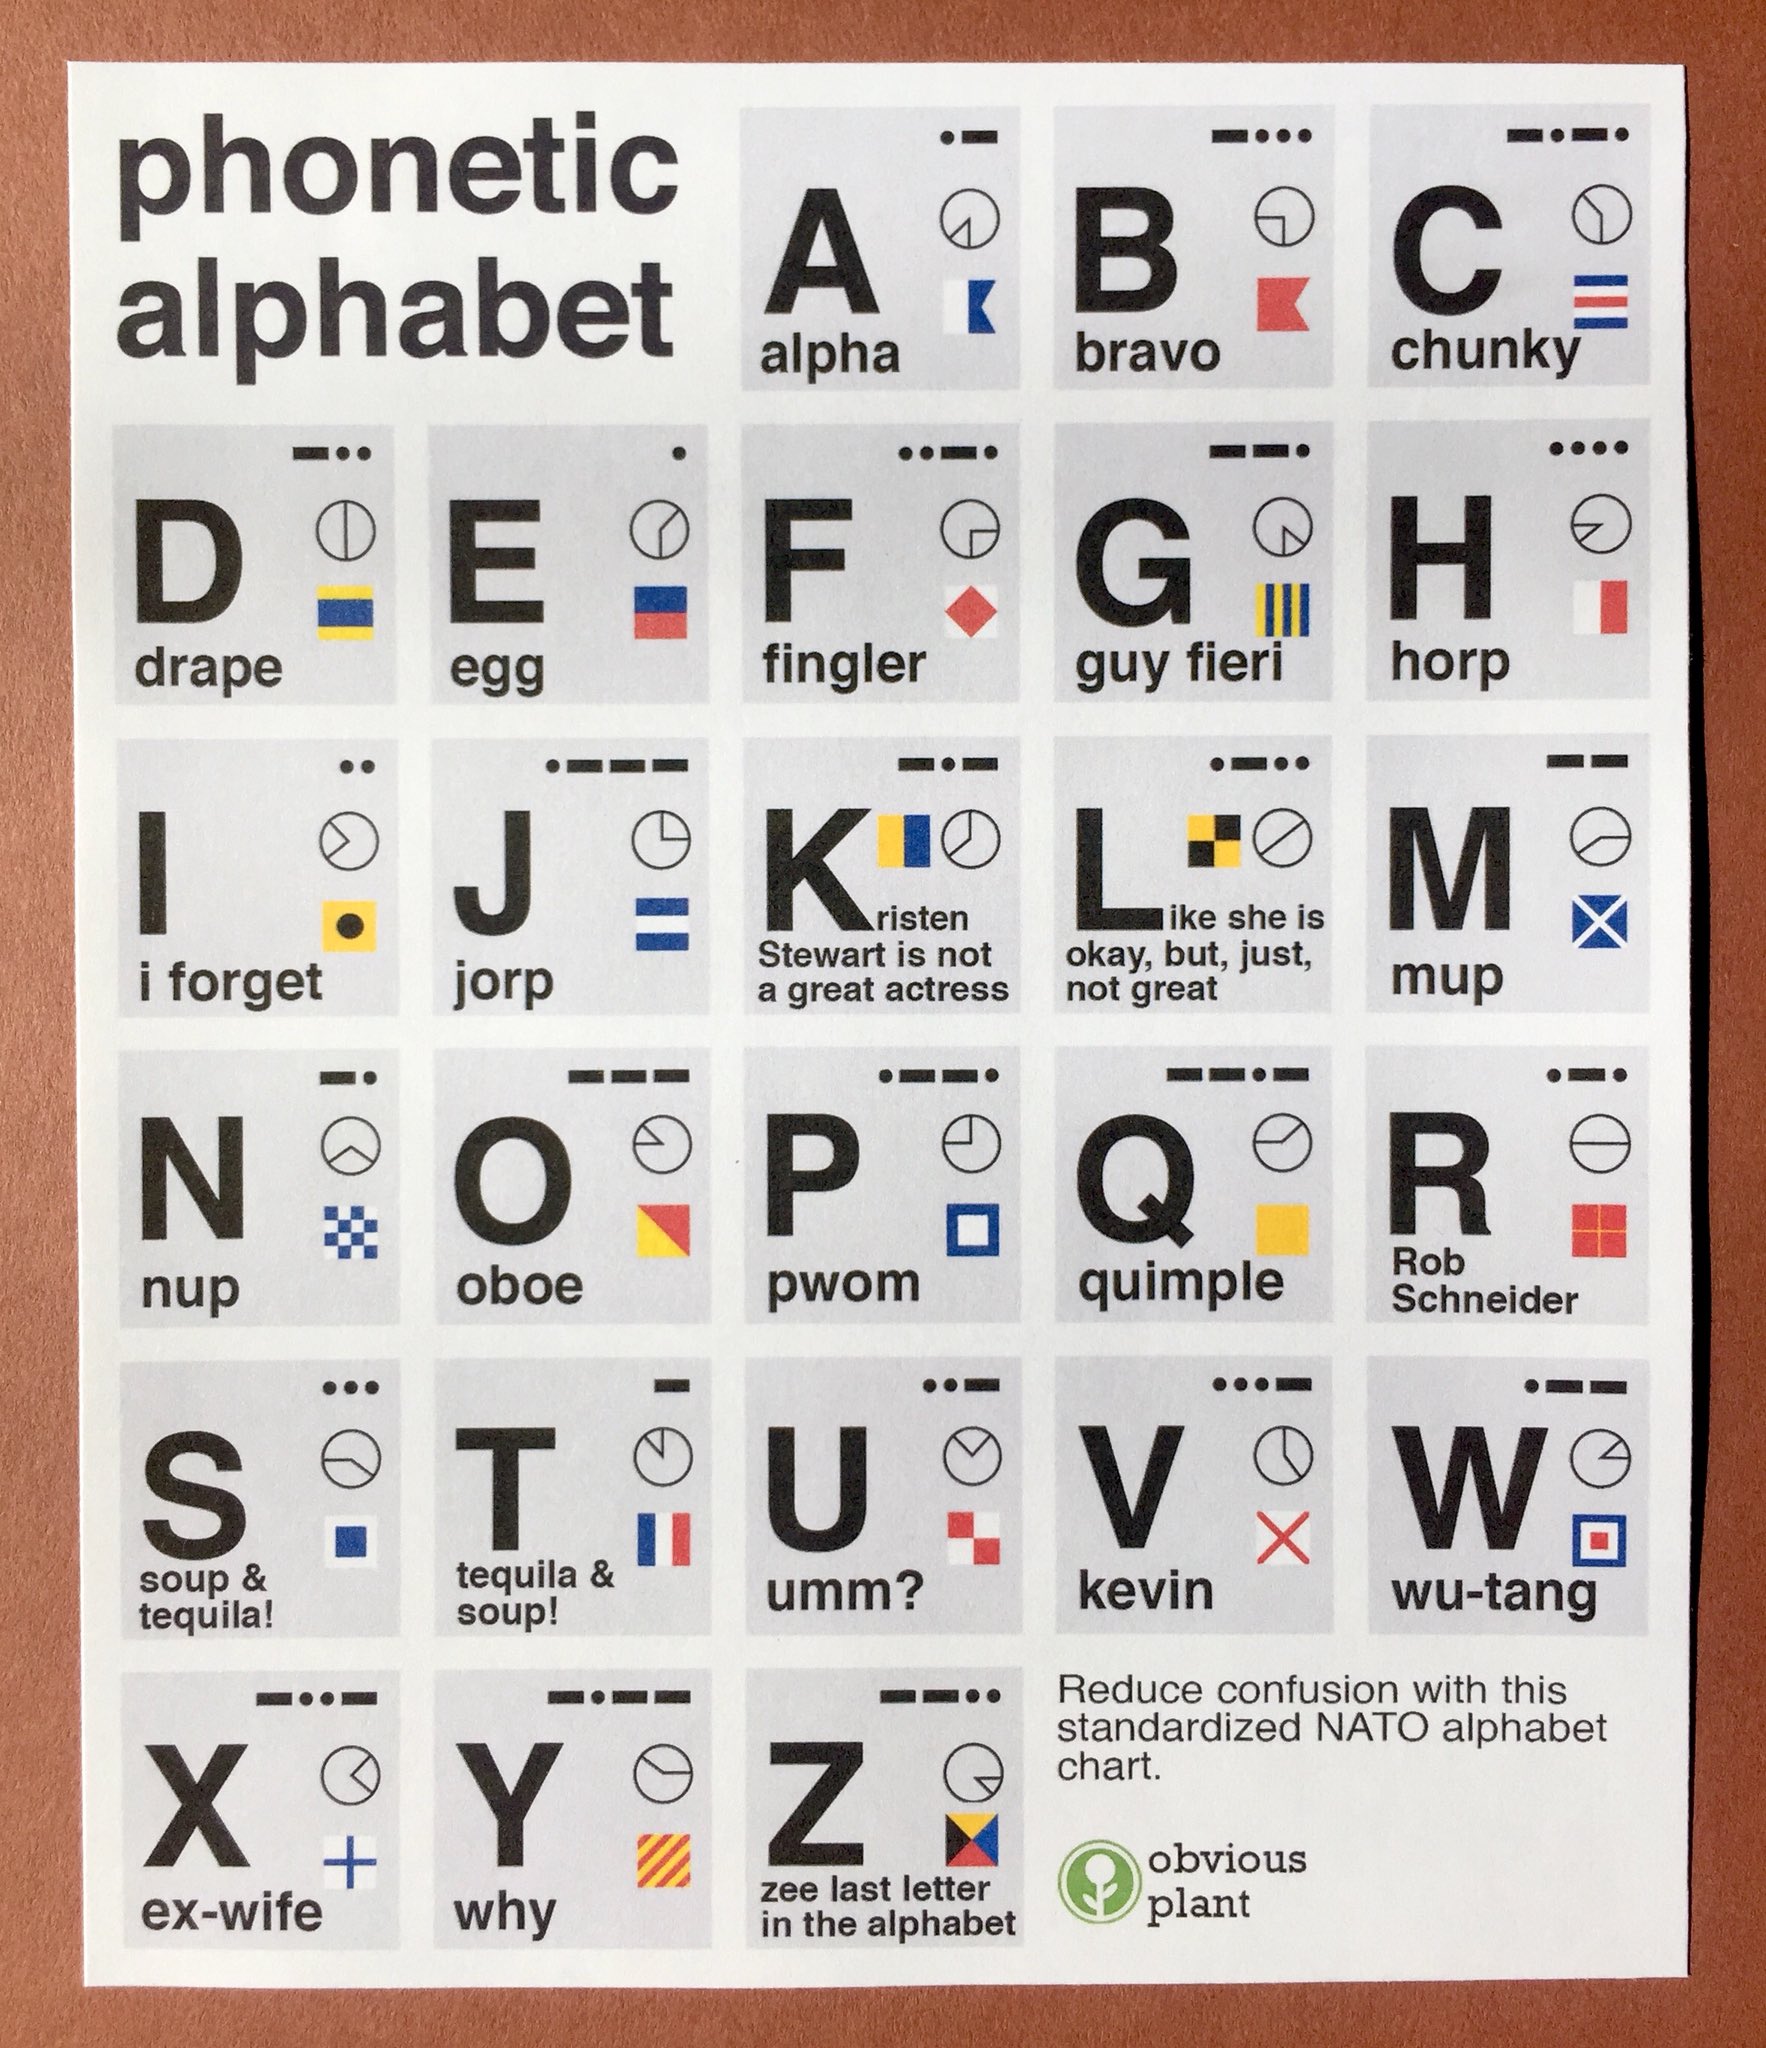 Obvious Plant On Twitter The Phonetic Alphabet Try Spelling Your Name